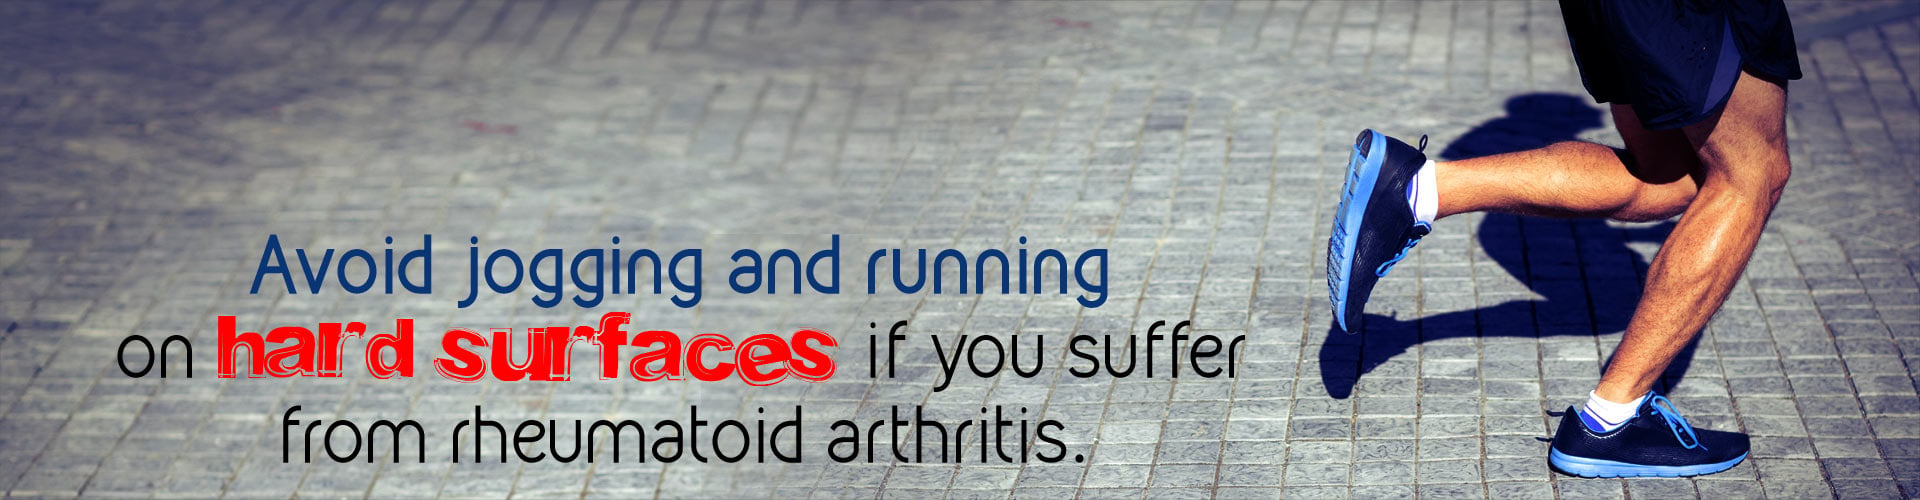 Avoid jogging and running on hard surfaces if you suffer from rheumatoid arthritis.